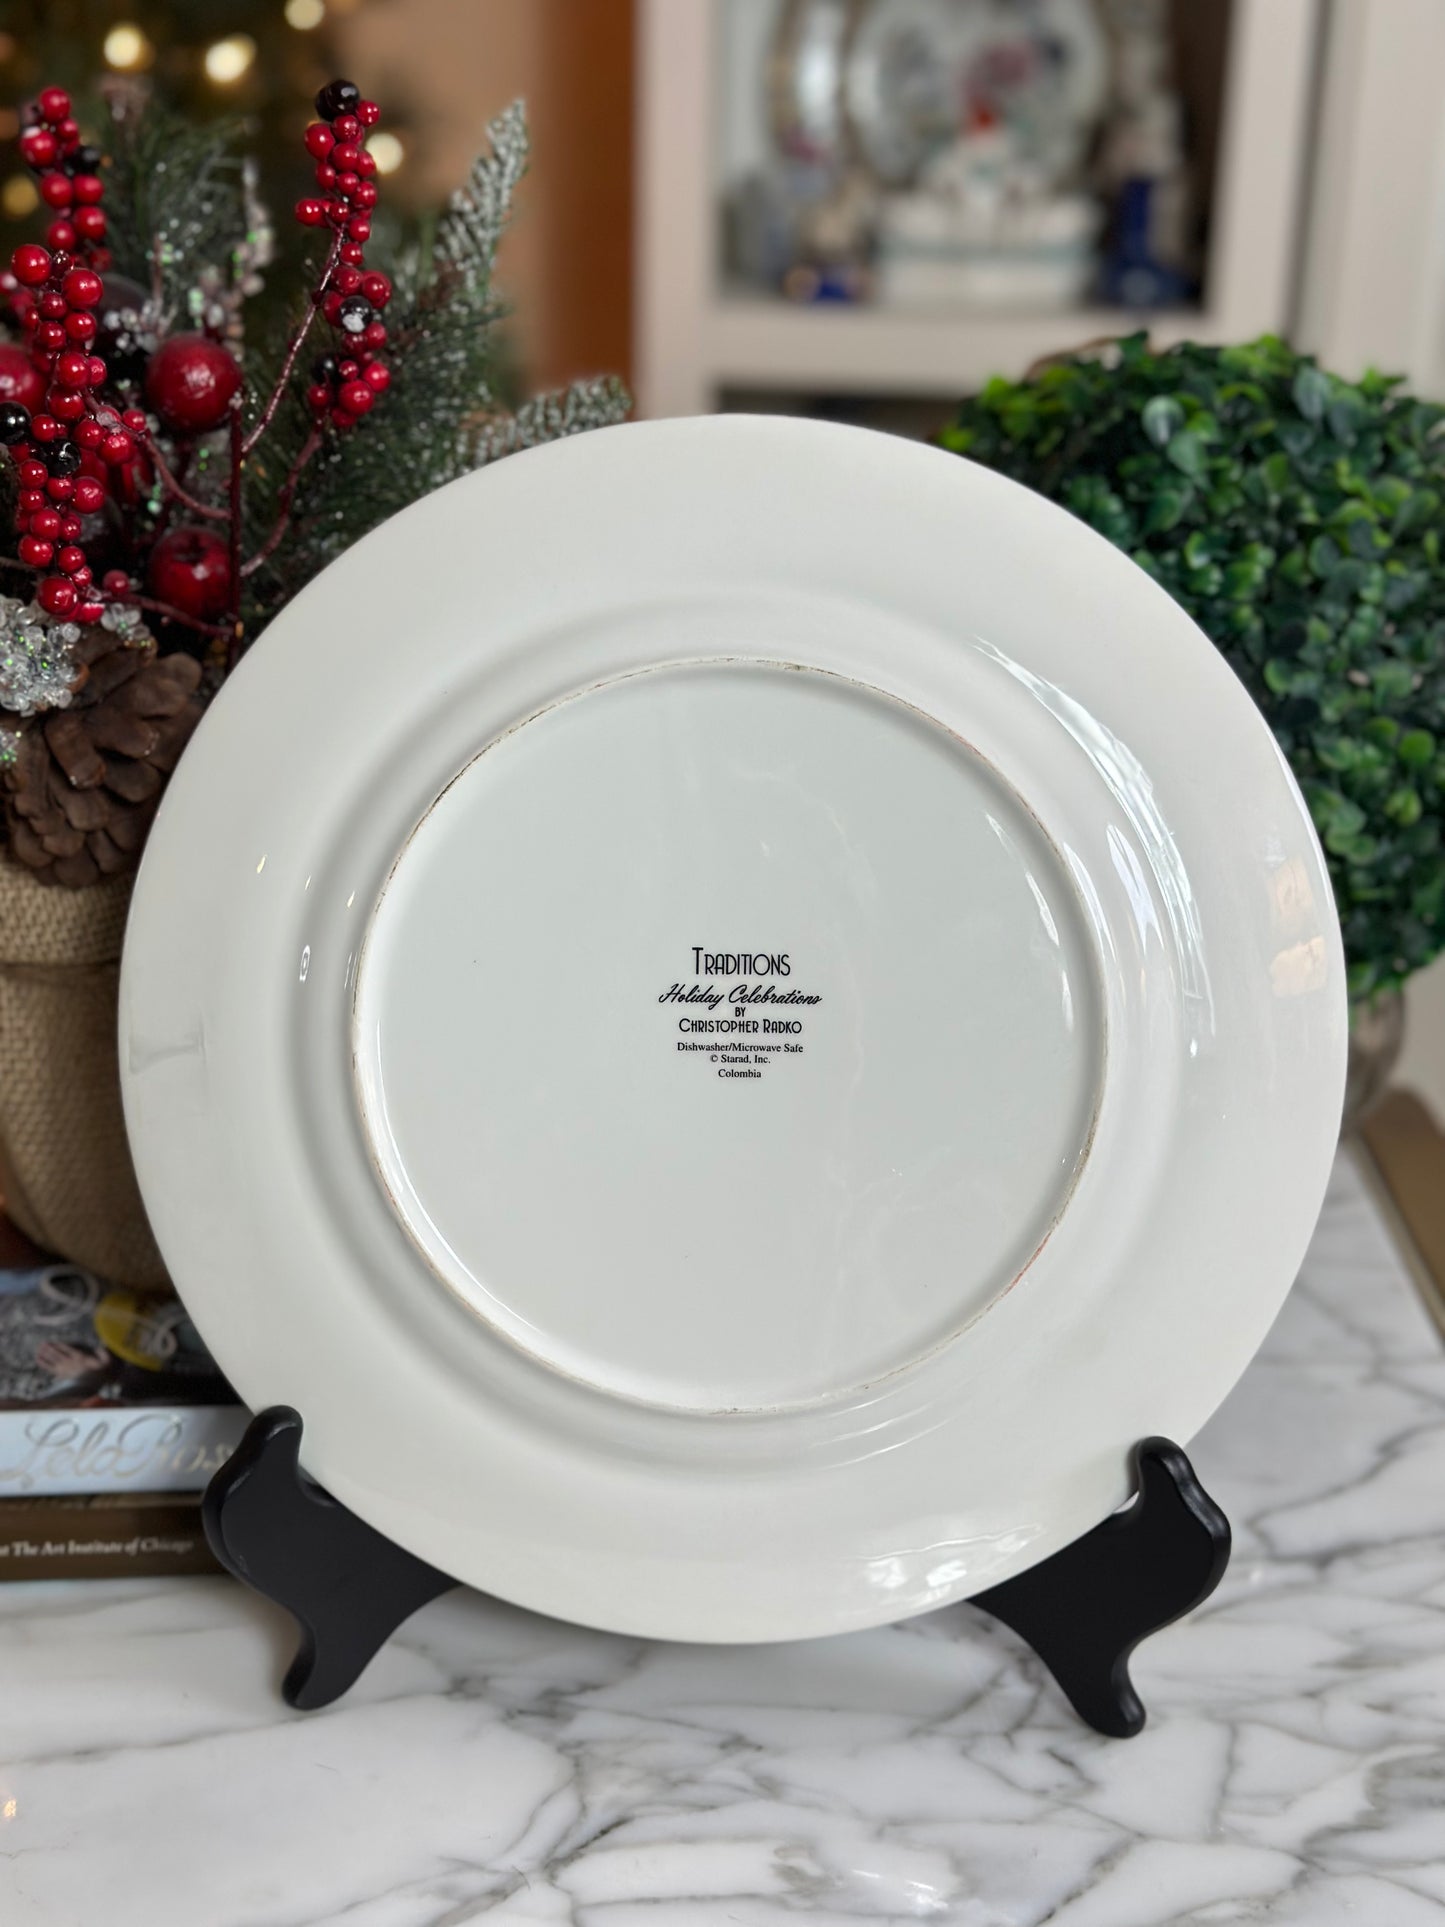 Christopher Radko “Holiday Traditions” Dinner Plate, 10.5”D